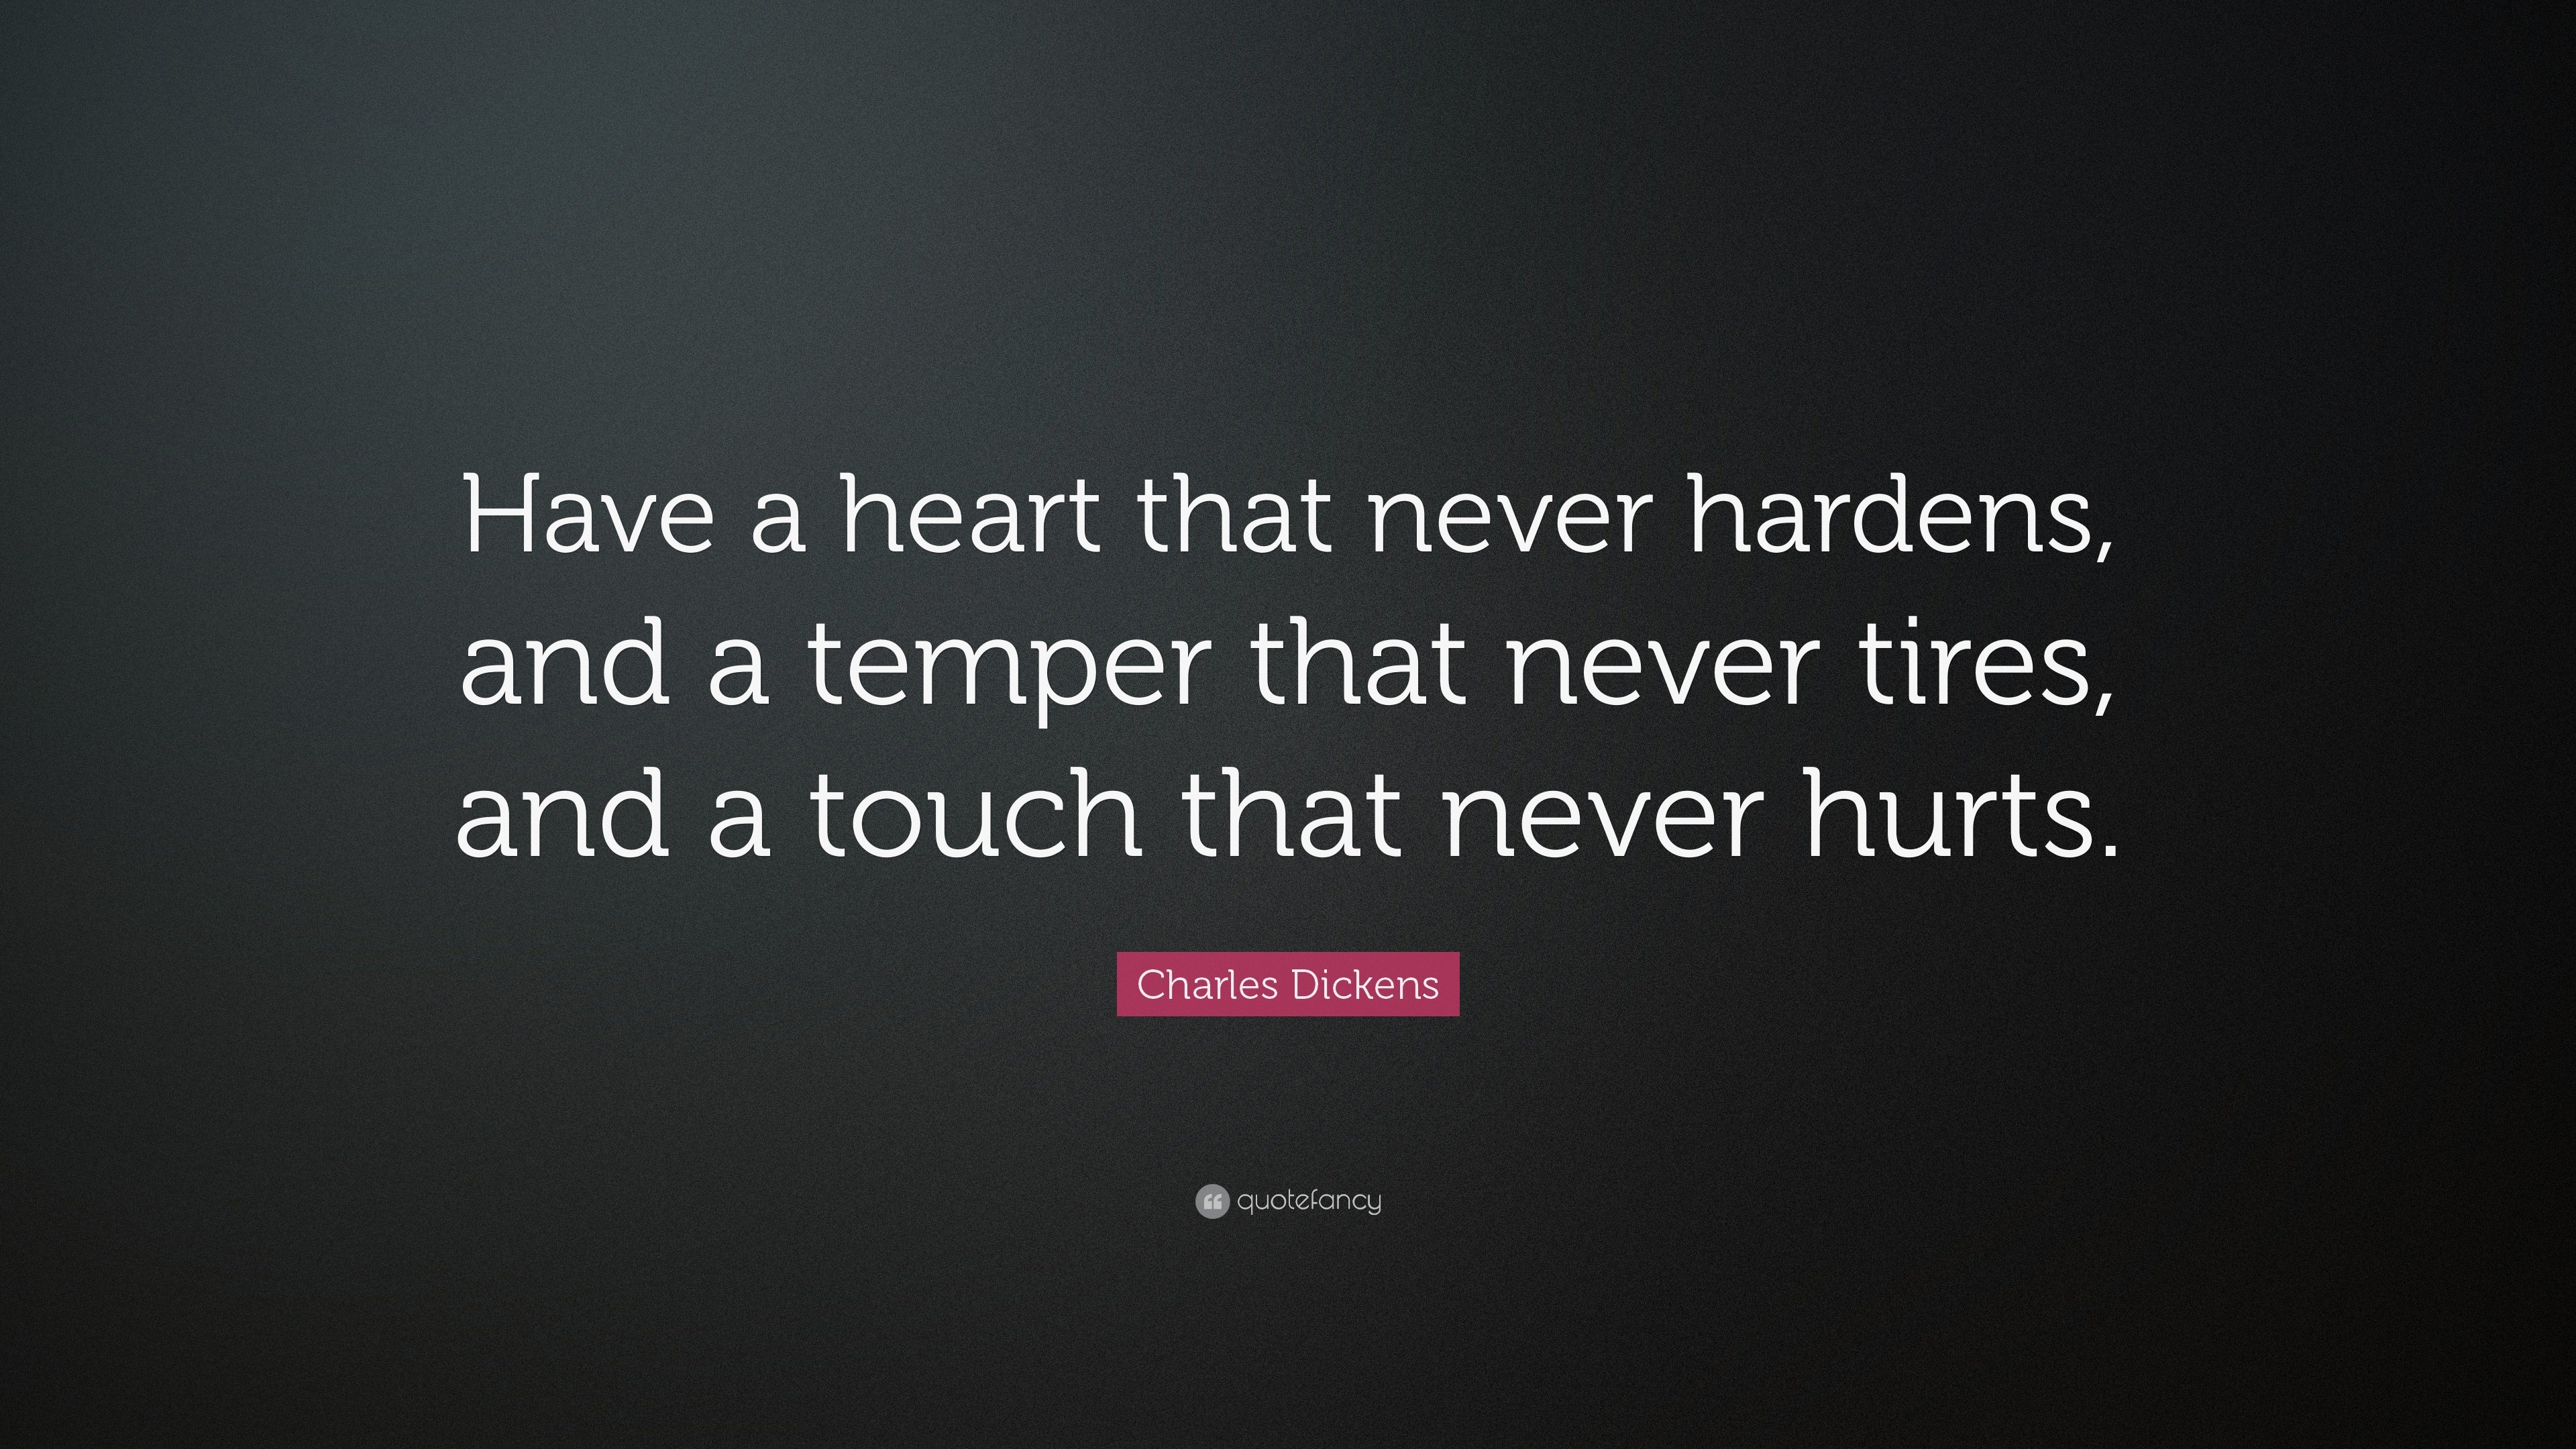 Charles DickensHave a Heart That Never Hardens Quote from Hard Times Unframed Print